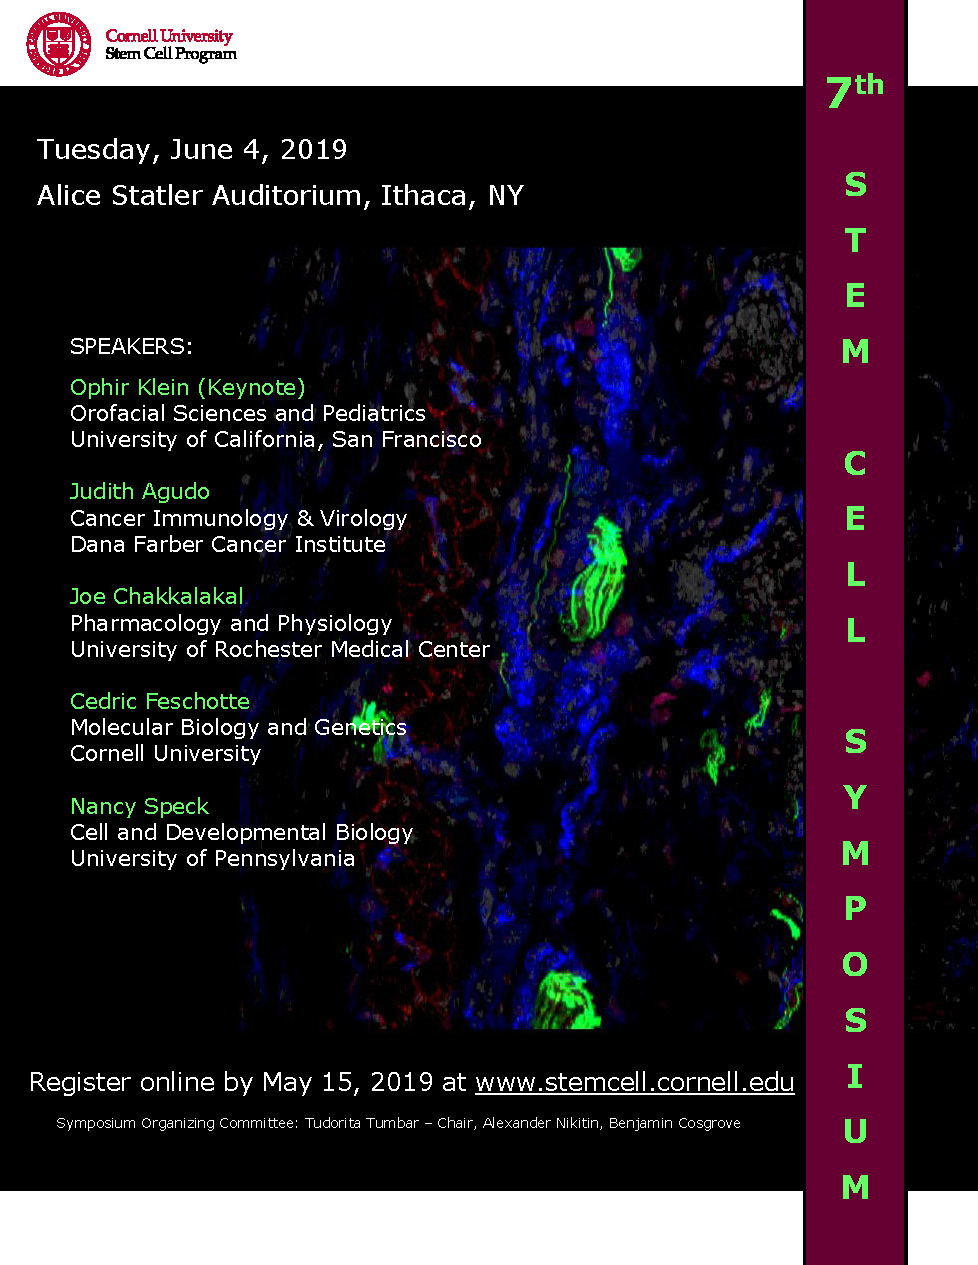 7th Stem Cell Symposium poster